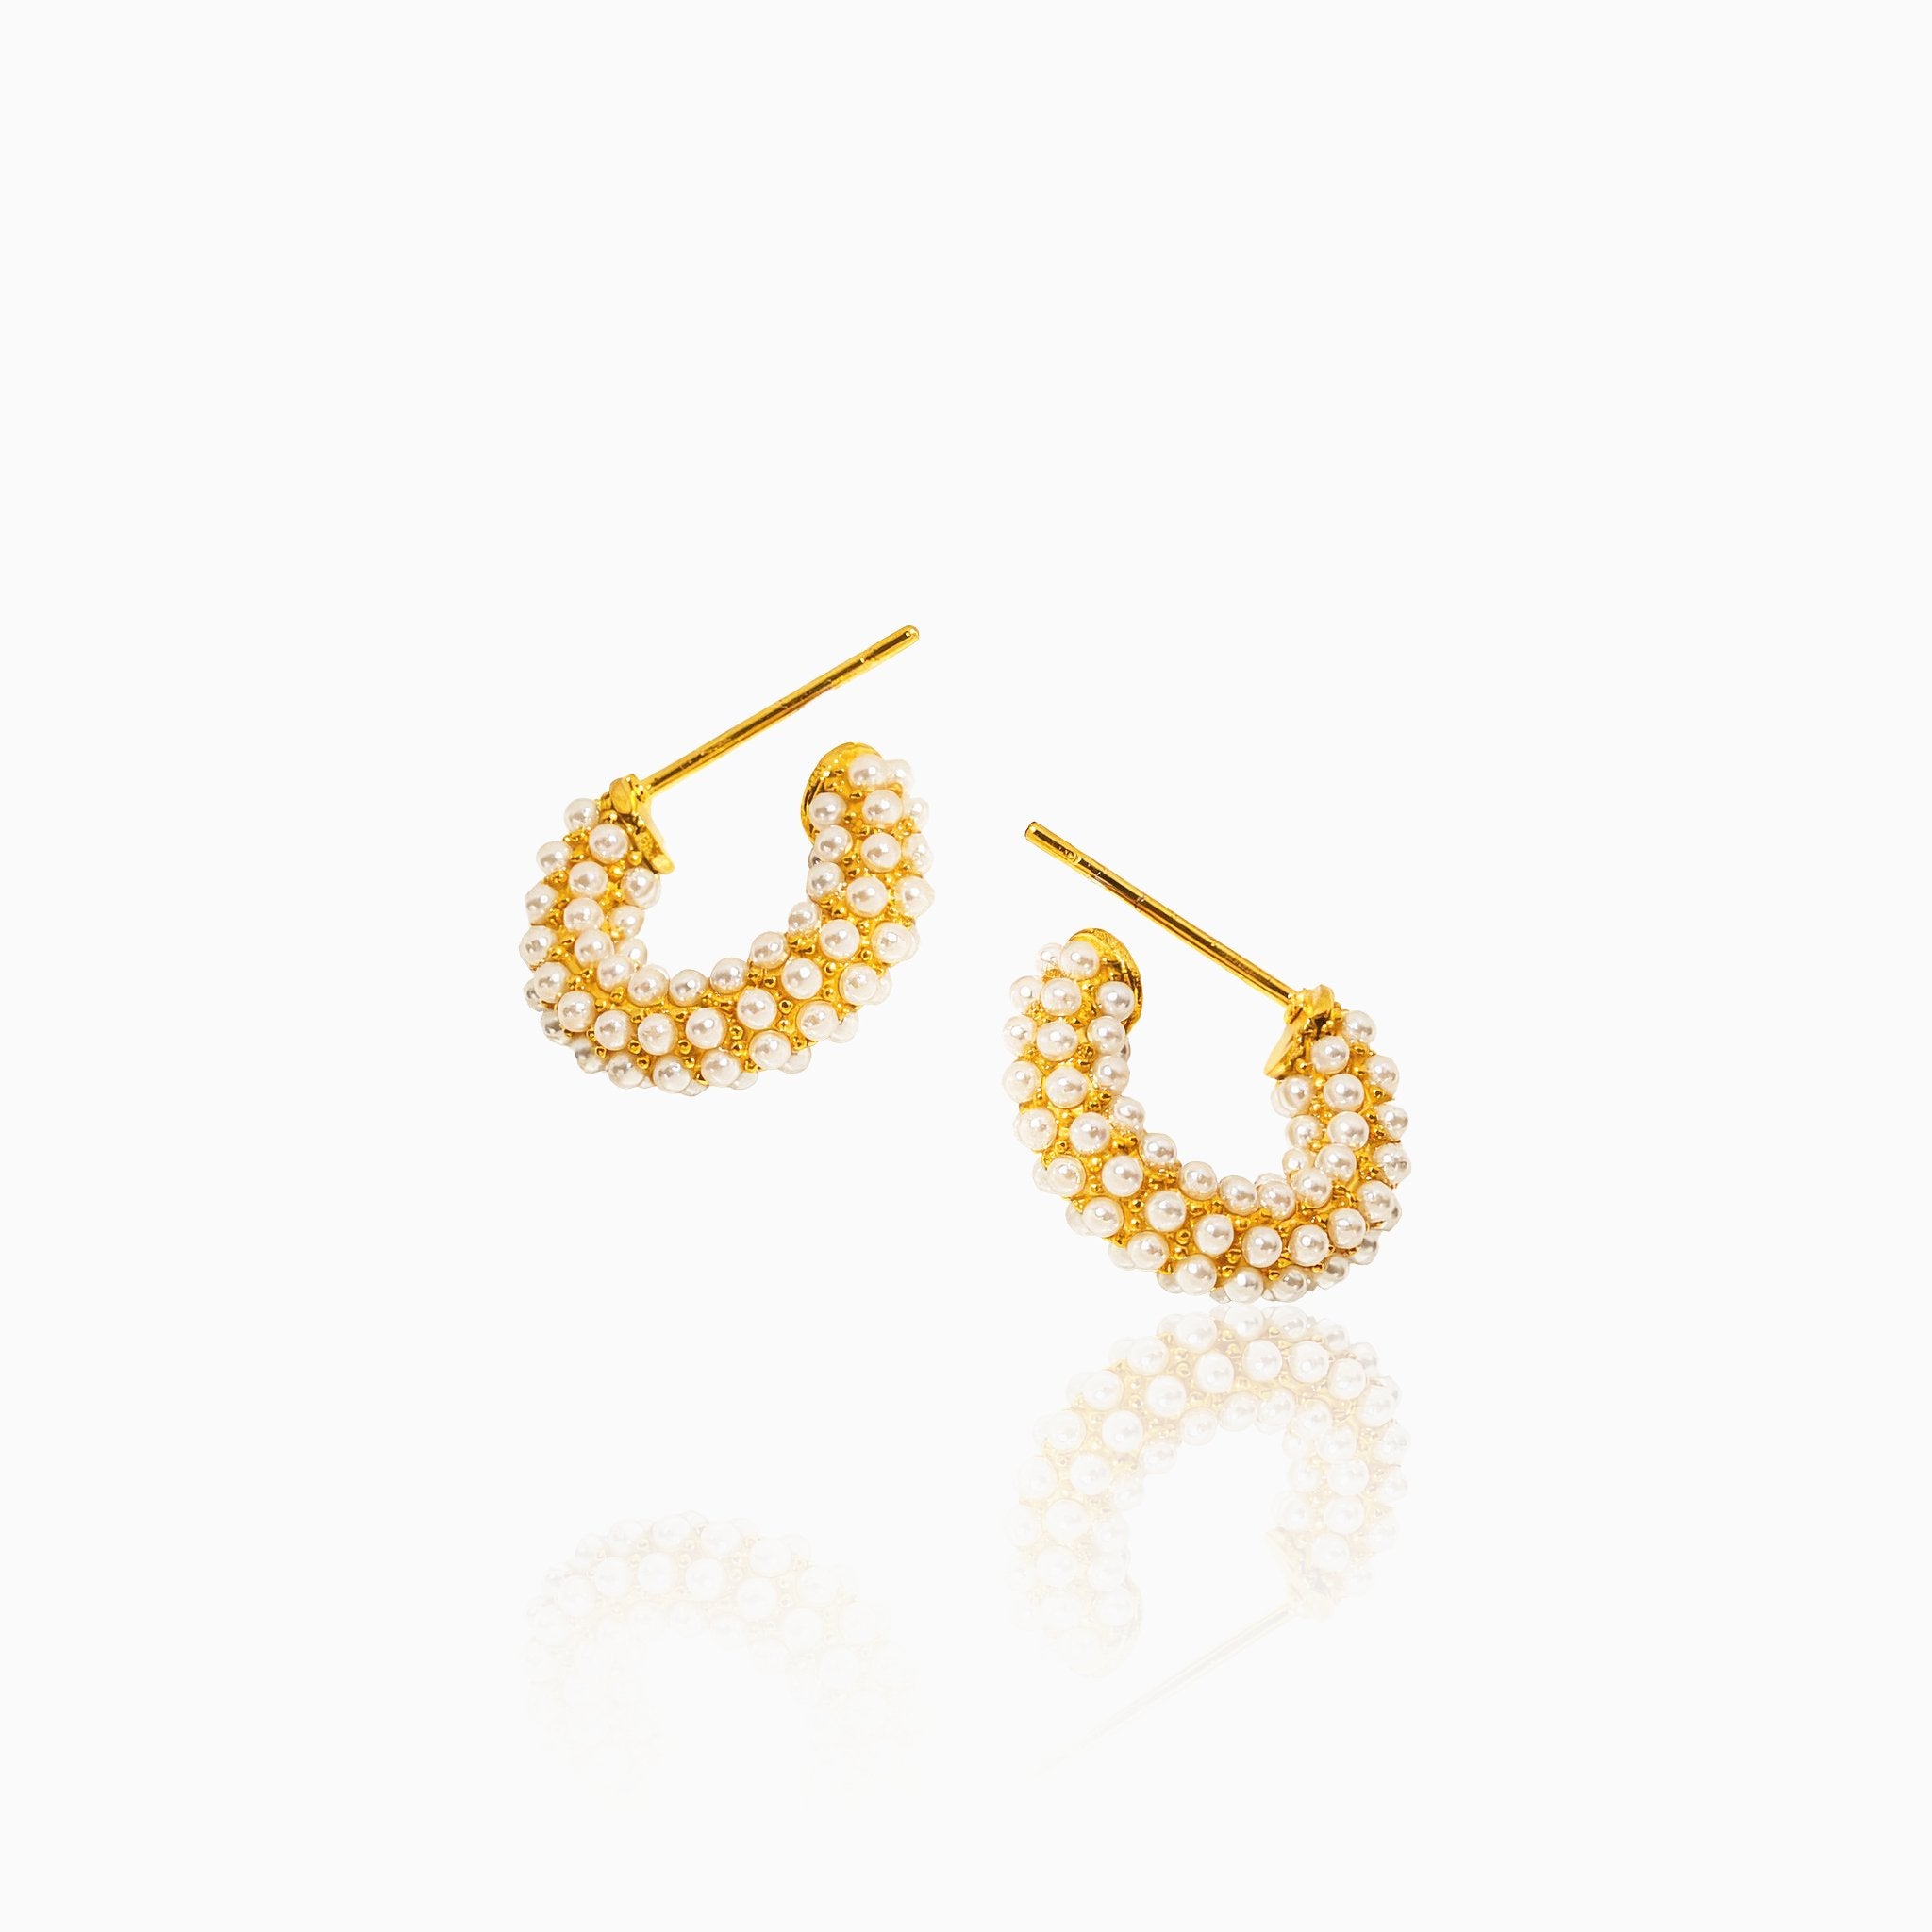 C-Shaped Earrings Encrusted with Pearls - Nobbier - Earrings - 18K Gold And Titanium PVD Coated Jewelry